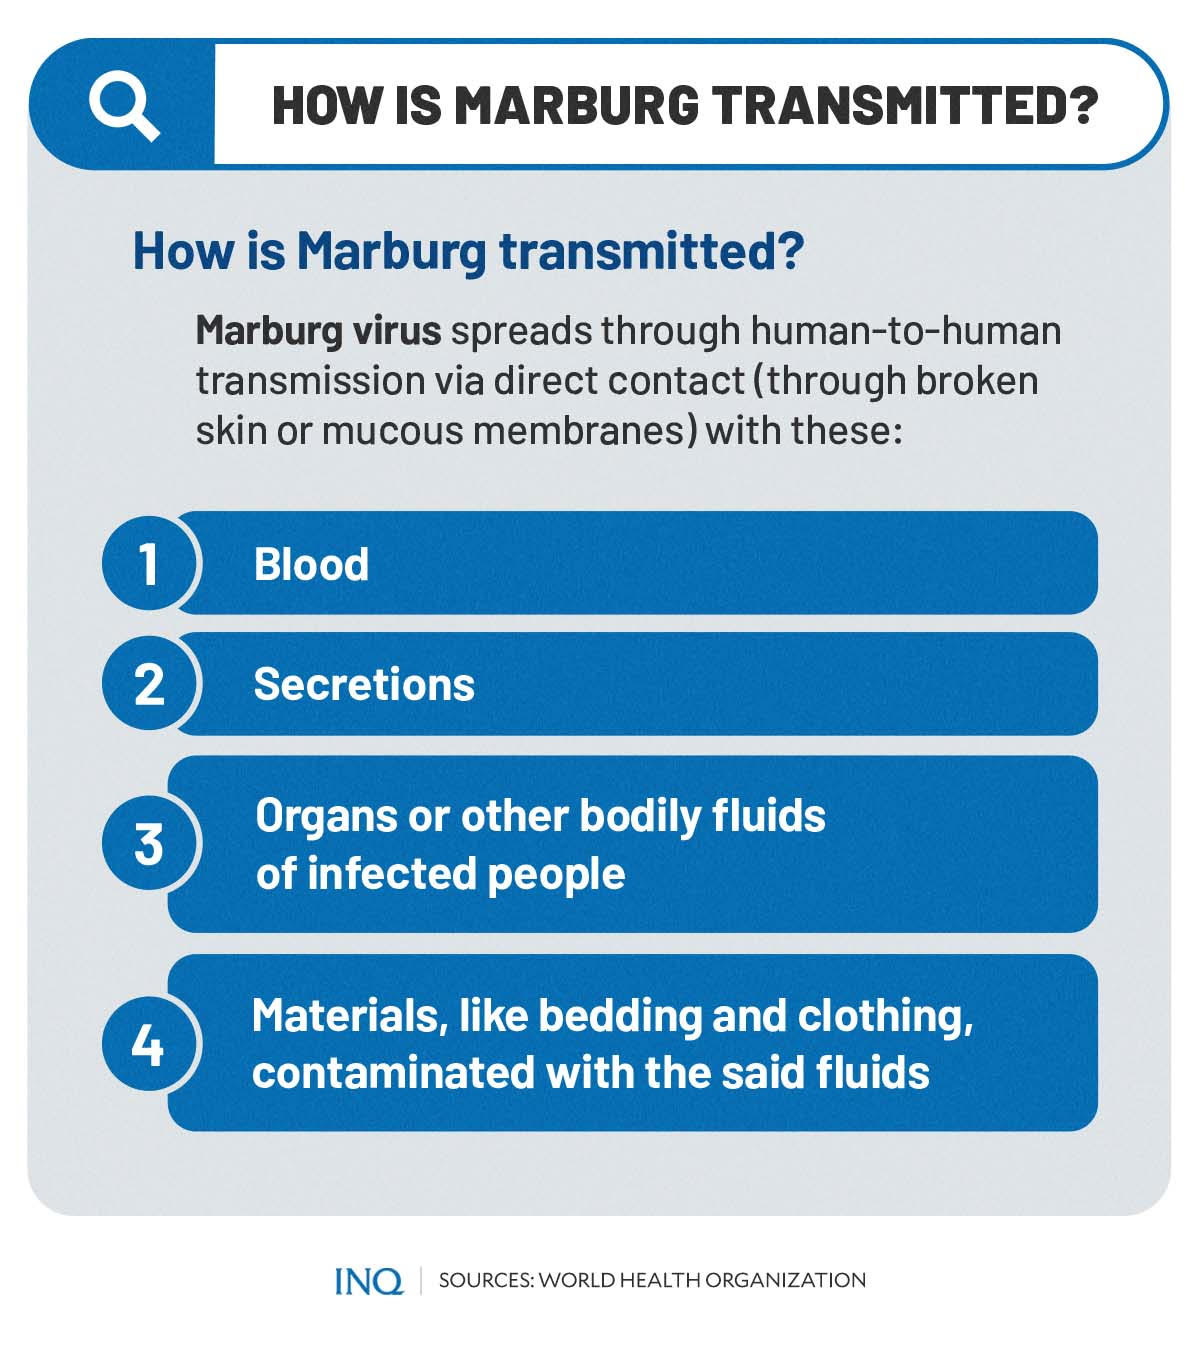 How is marburg transmitted